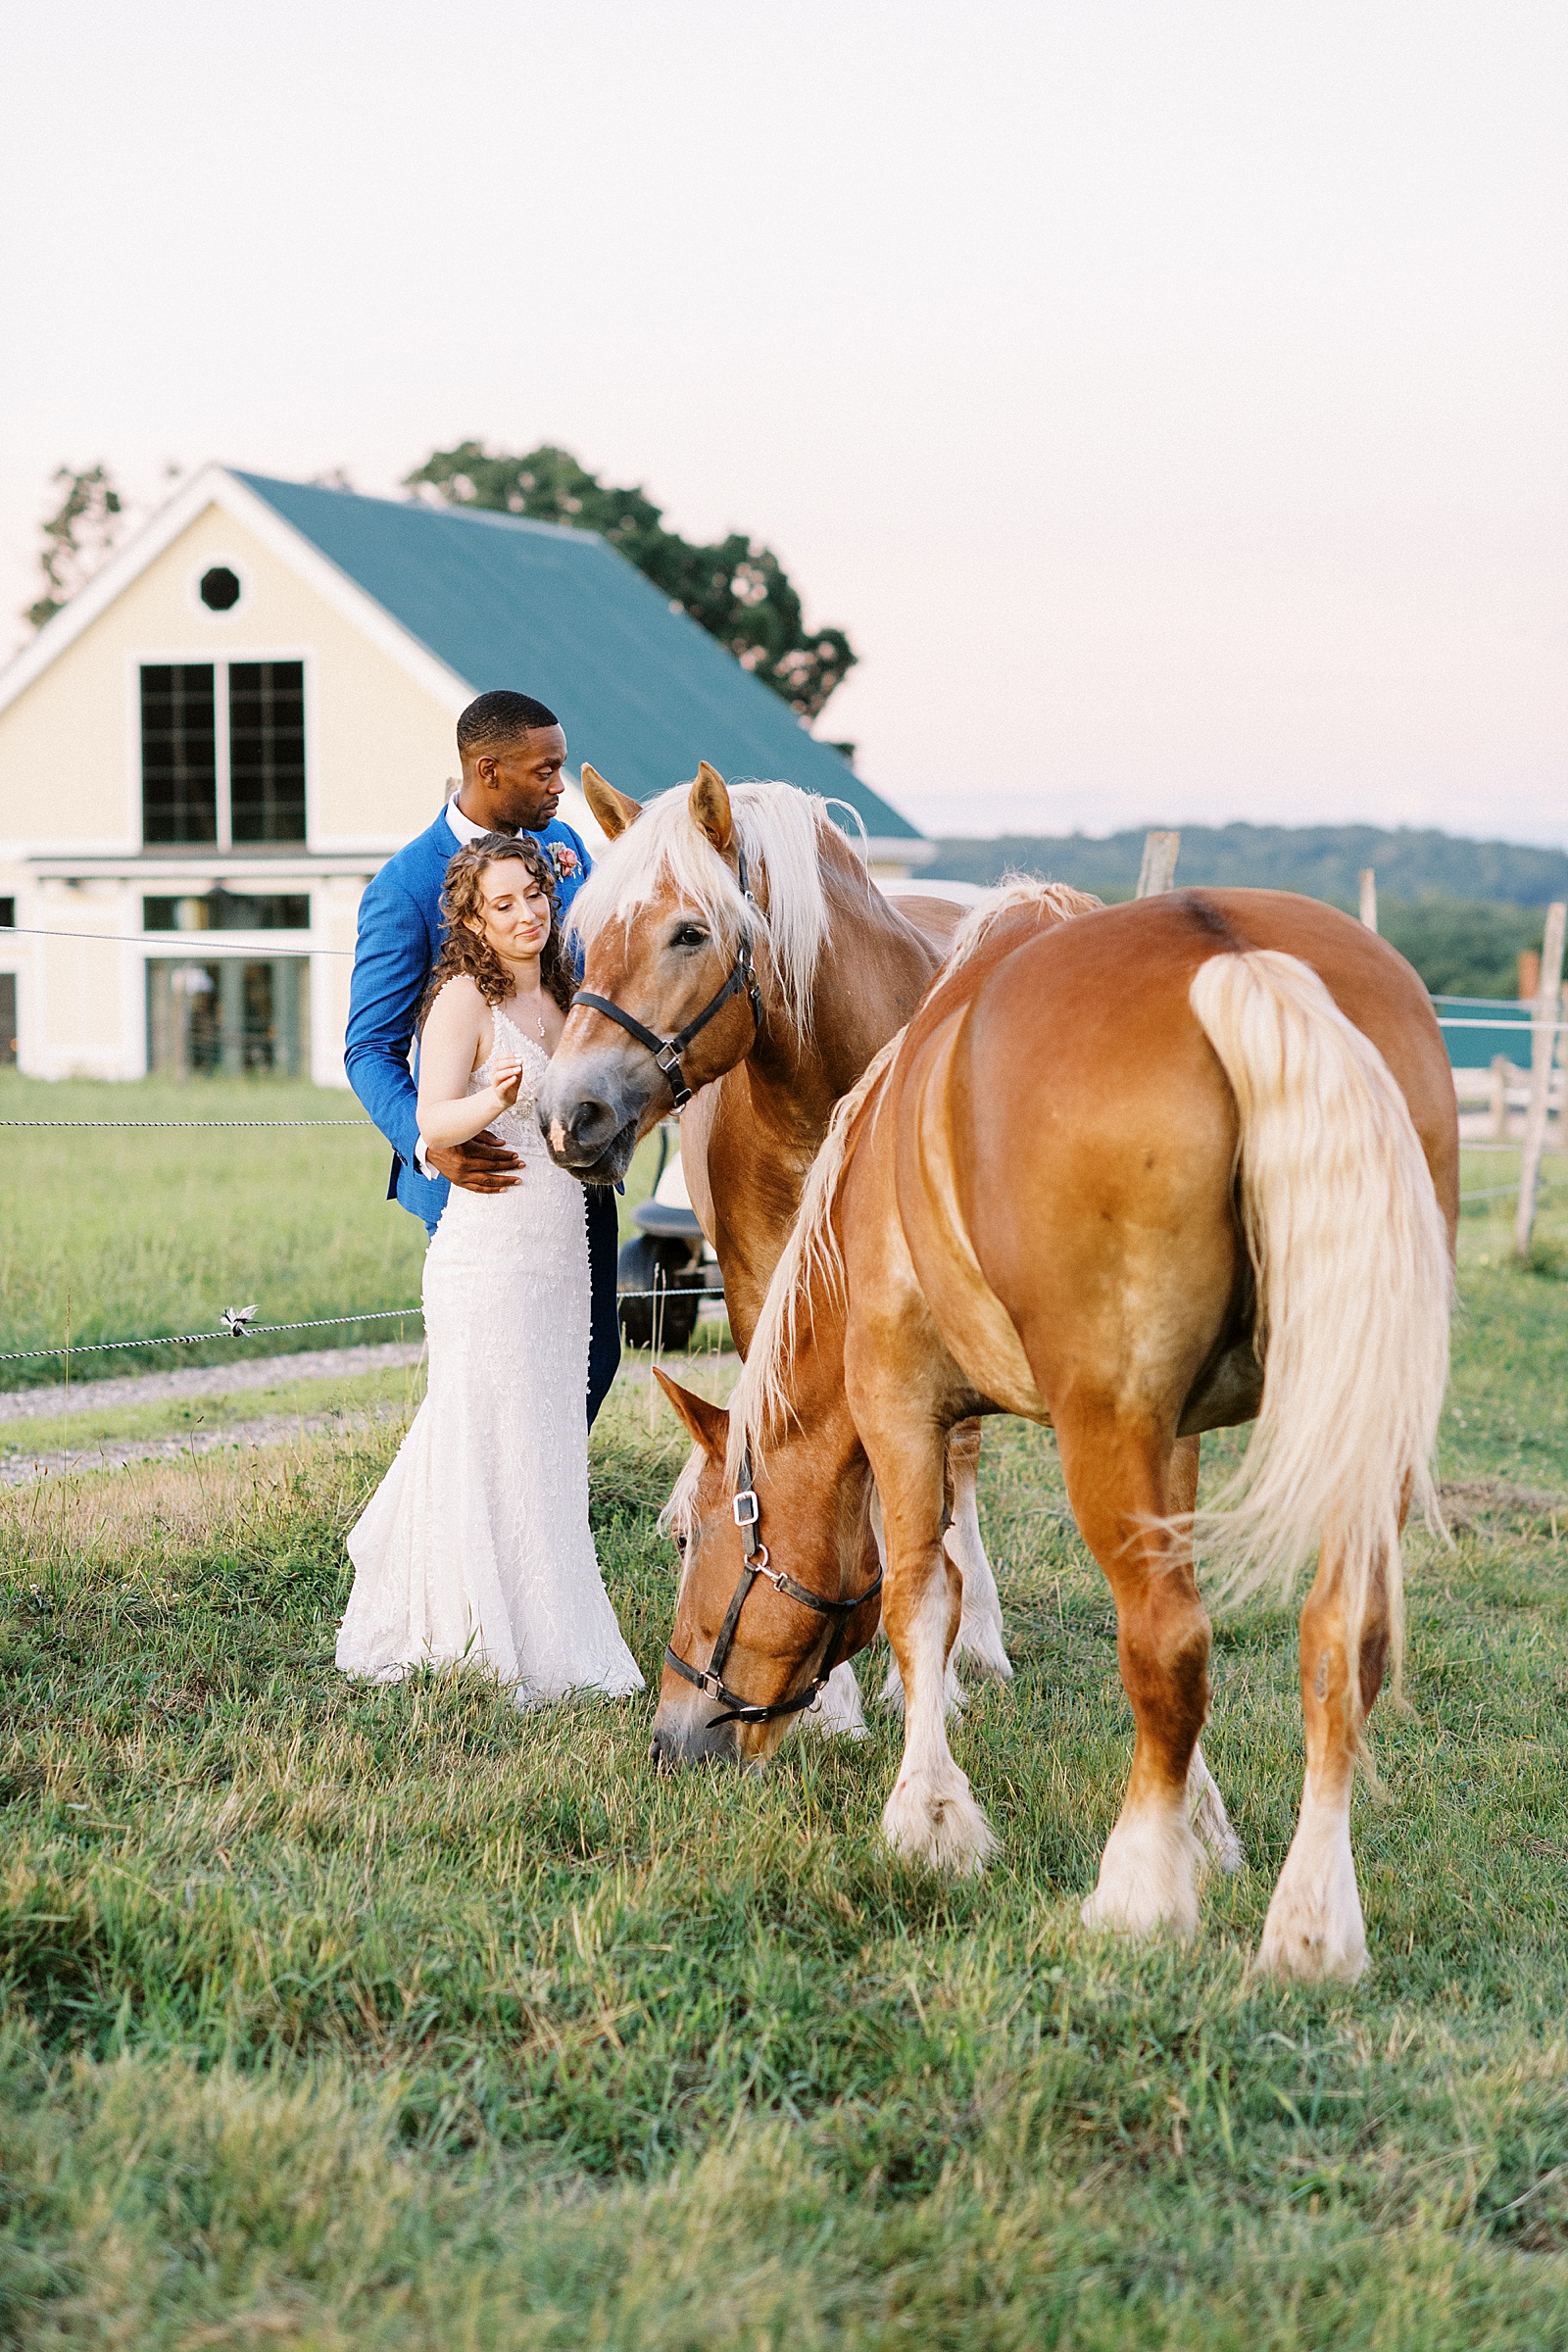 Newlywed couple petting horses at their wedding with Boston wedding photographer.